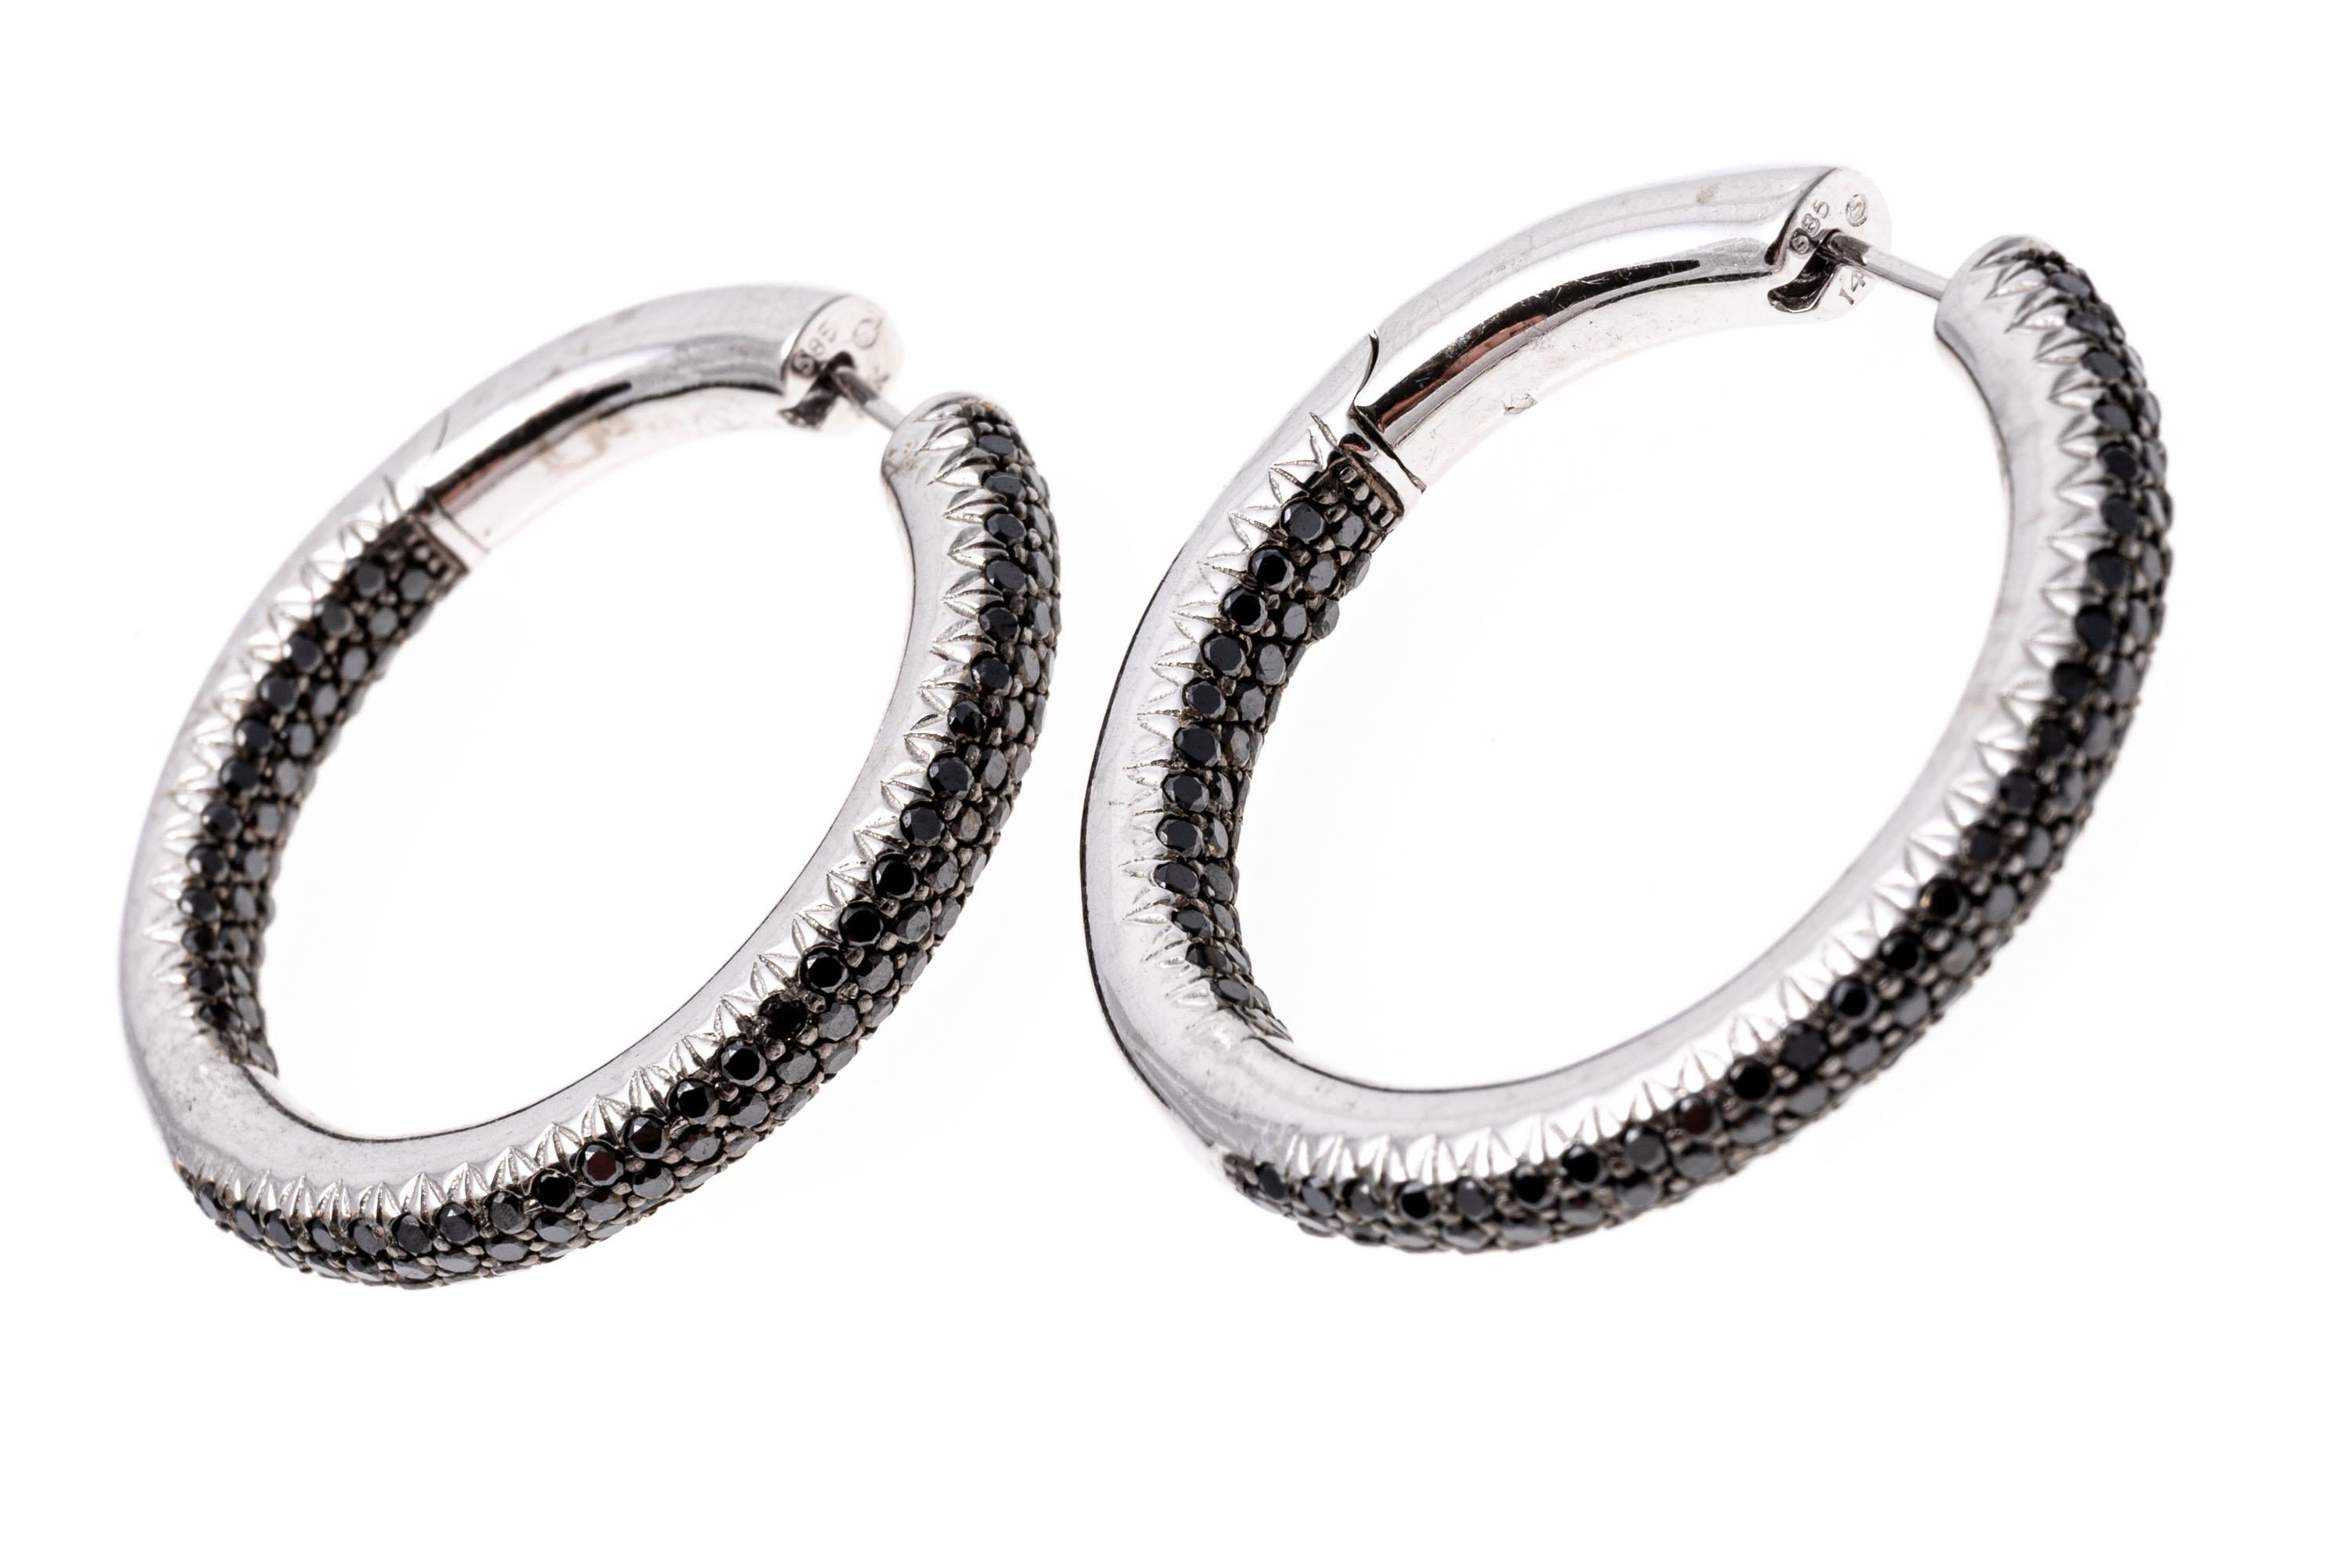 14k white gold earrings. These stunning hoop earrings are a rounded tube style, pave set with round faceted black diamonds, 2.85 TCW. The earrings have a post with a hinged, snap style back.
Marks: 14/585
Dimensions: 1